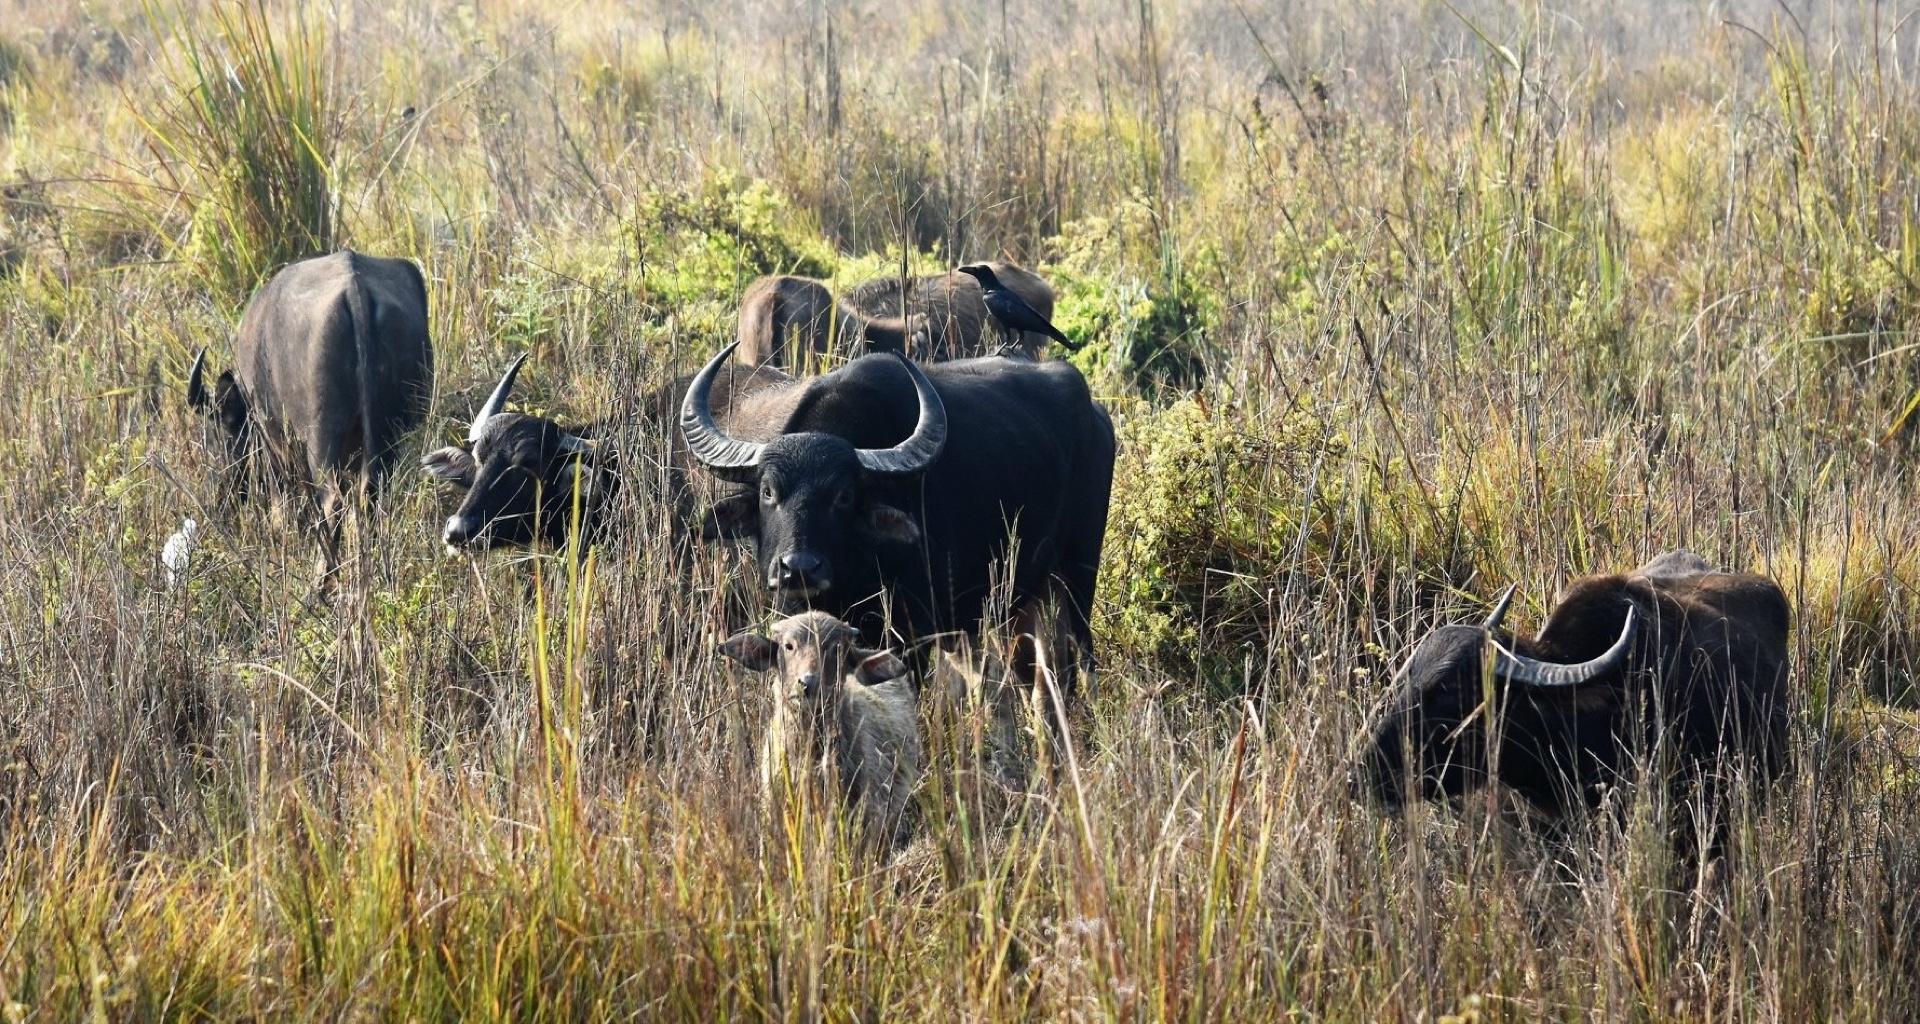 Wild buffalo life at CNP comes under threat, animal vanishing in want of suitable habitat